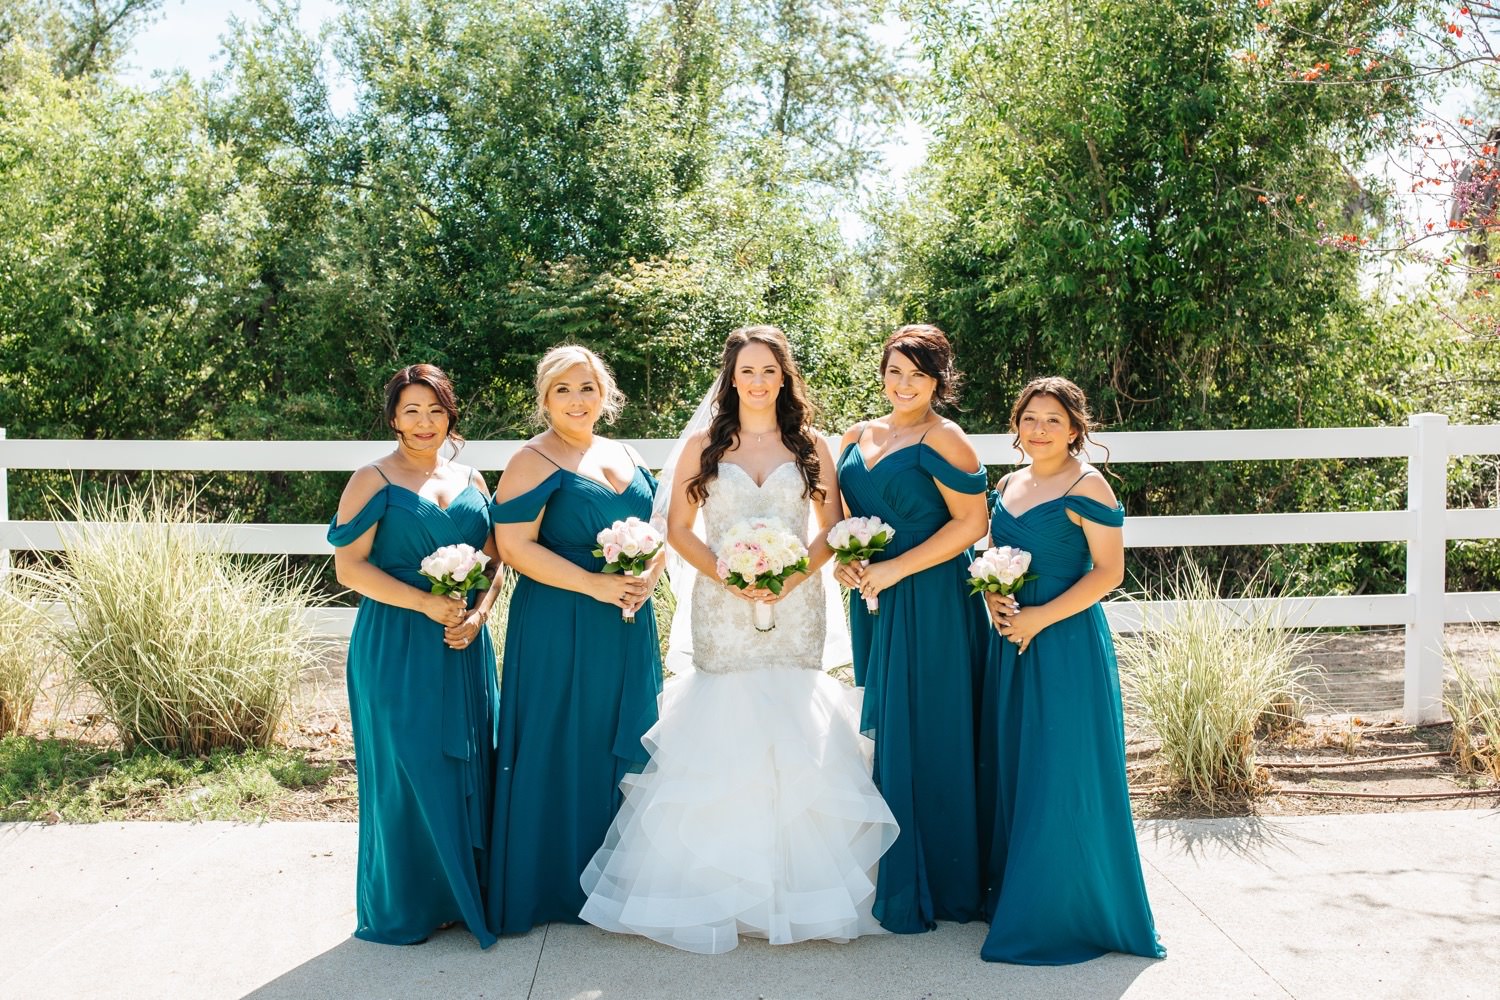 Bride and Bridesmaids Photos - https://brittneyhannonphotography.com